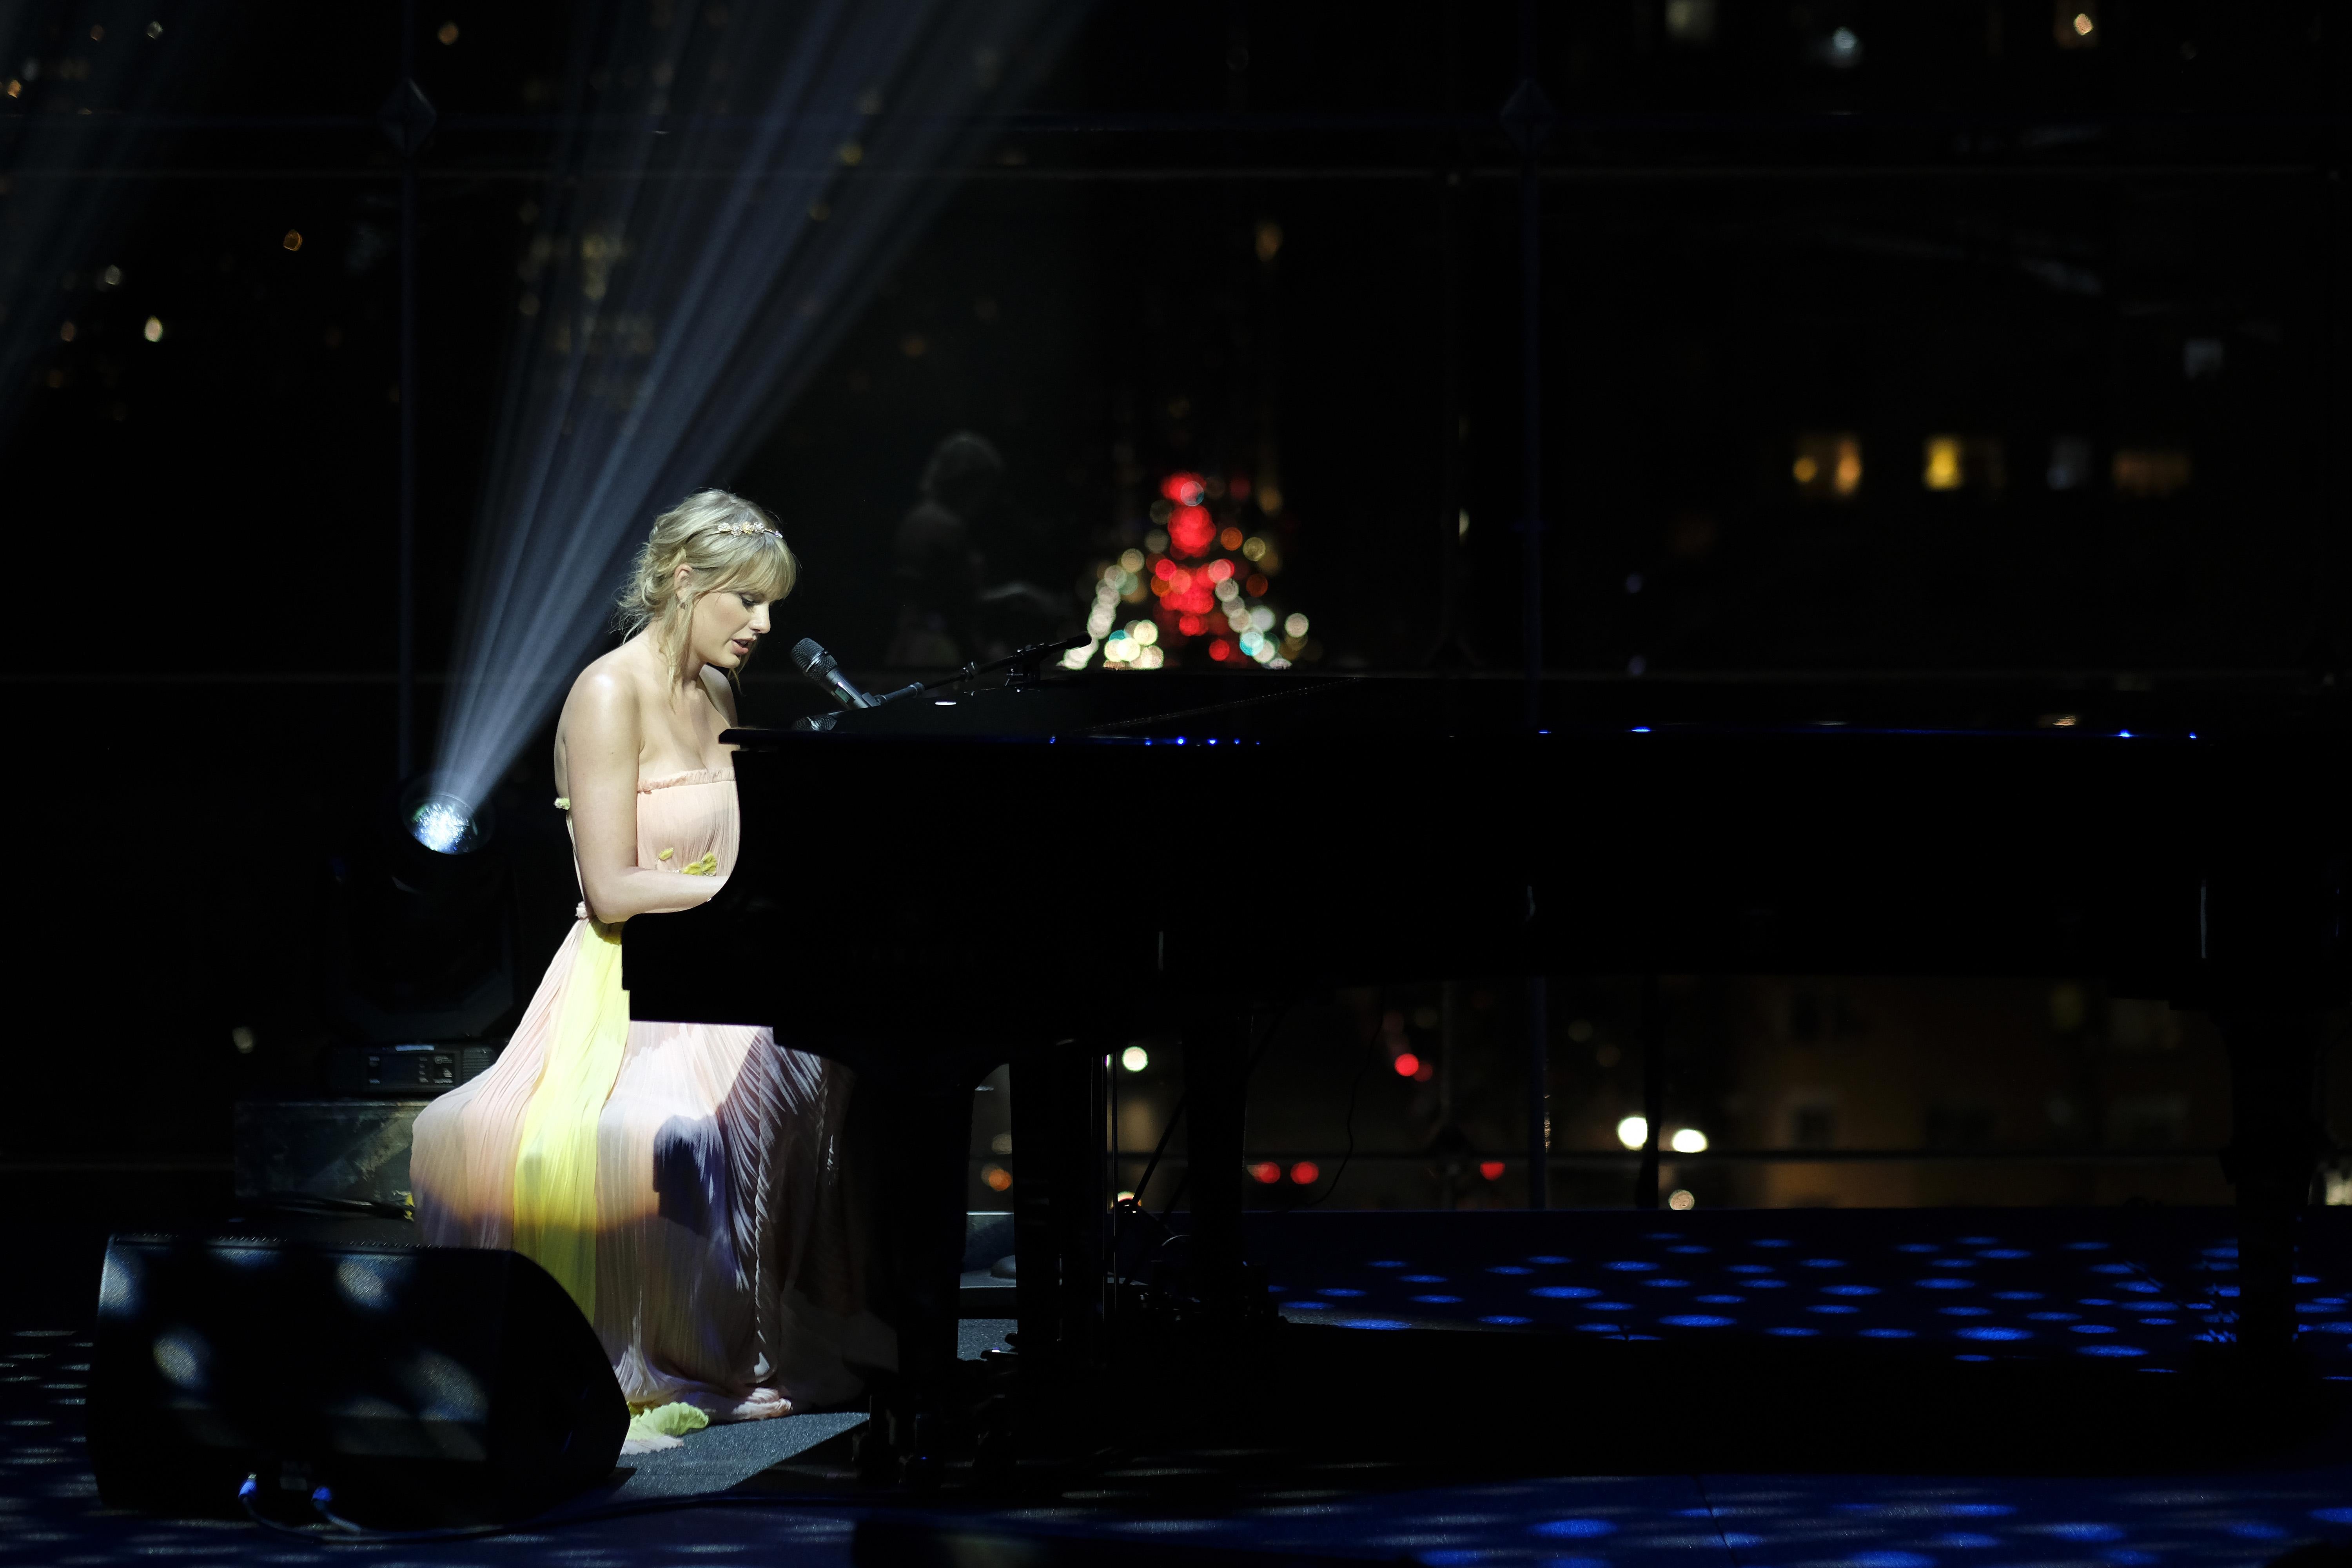 Taylor Swift singing and playing piano onstage at the TIME 100 Gala at Jazz at Lincoln Center in New York City on April 23.